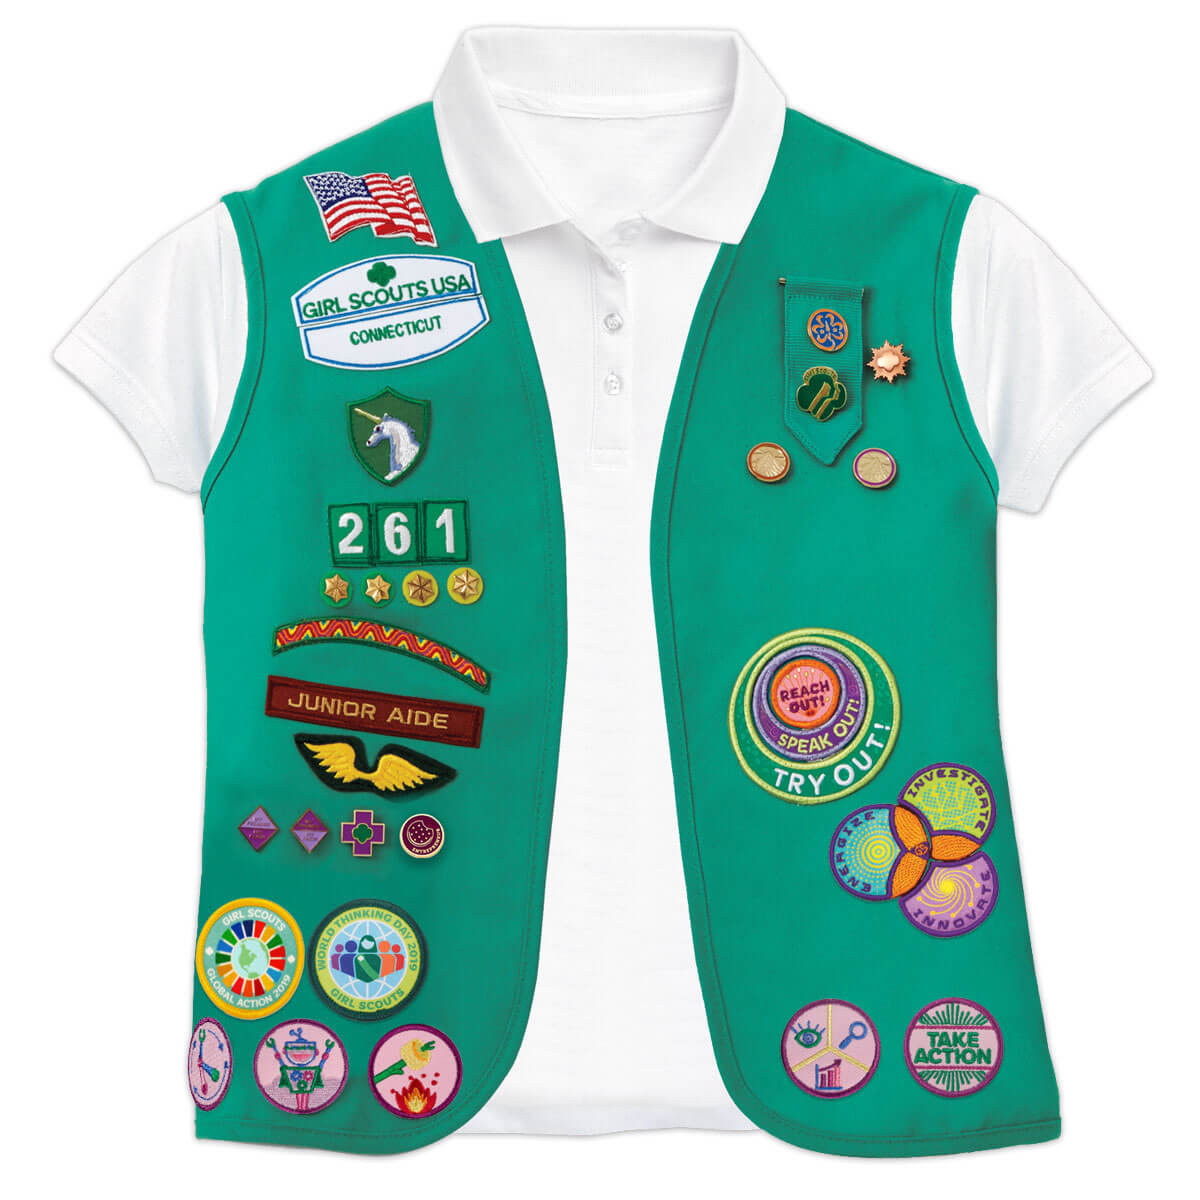 Girl Scouts 0055-4 Official Vest, Girl's, XL, Cotton/Polyester, Green - 2